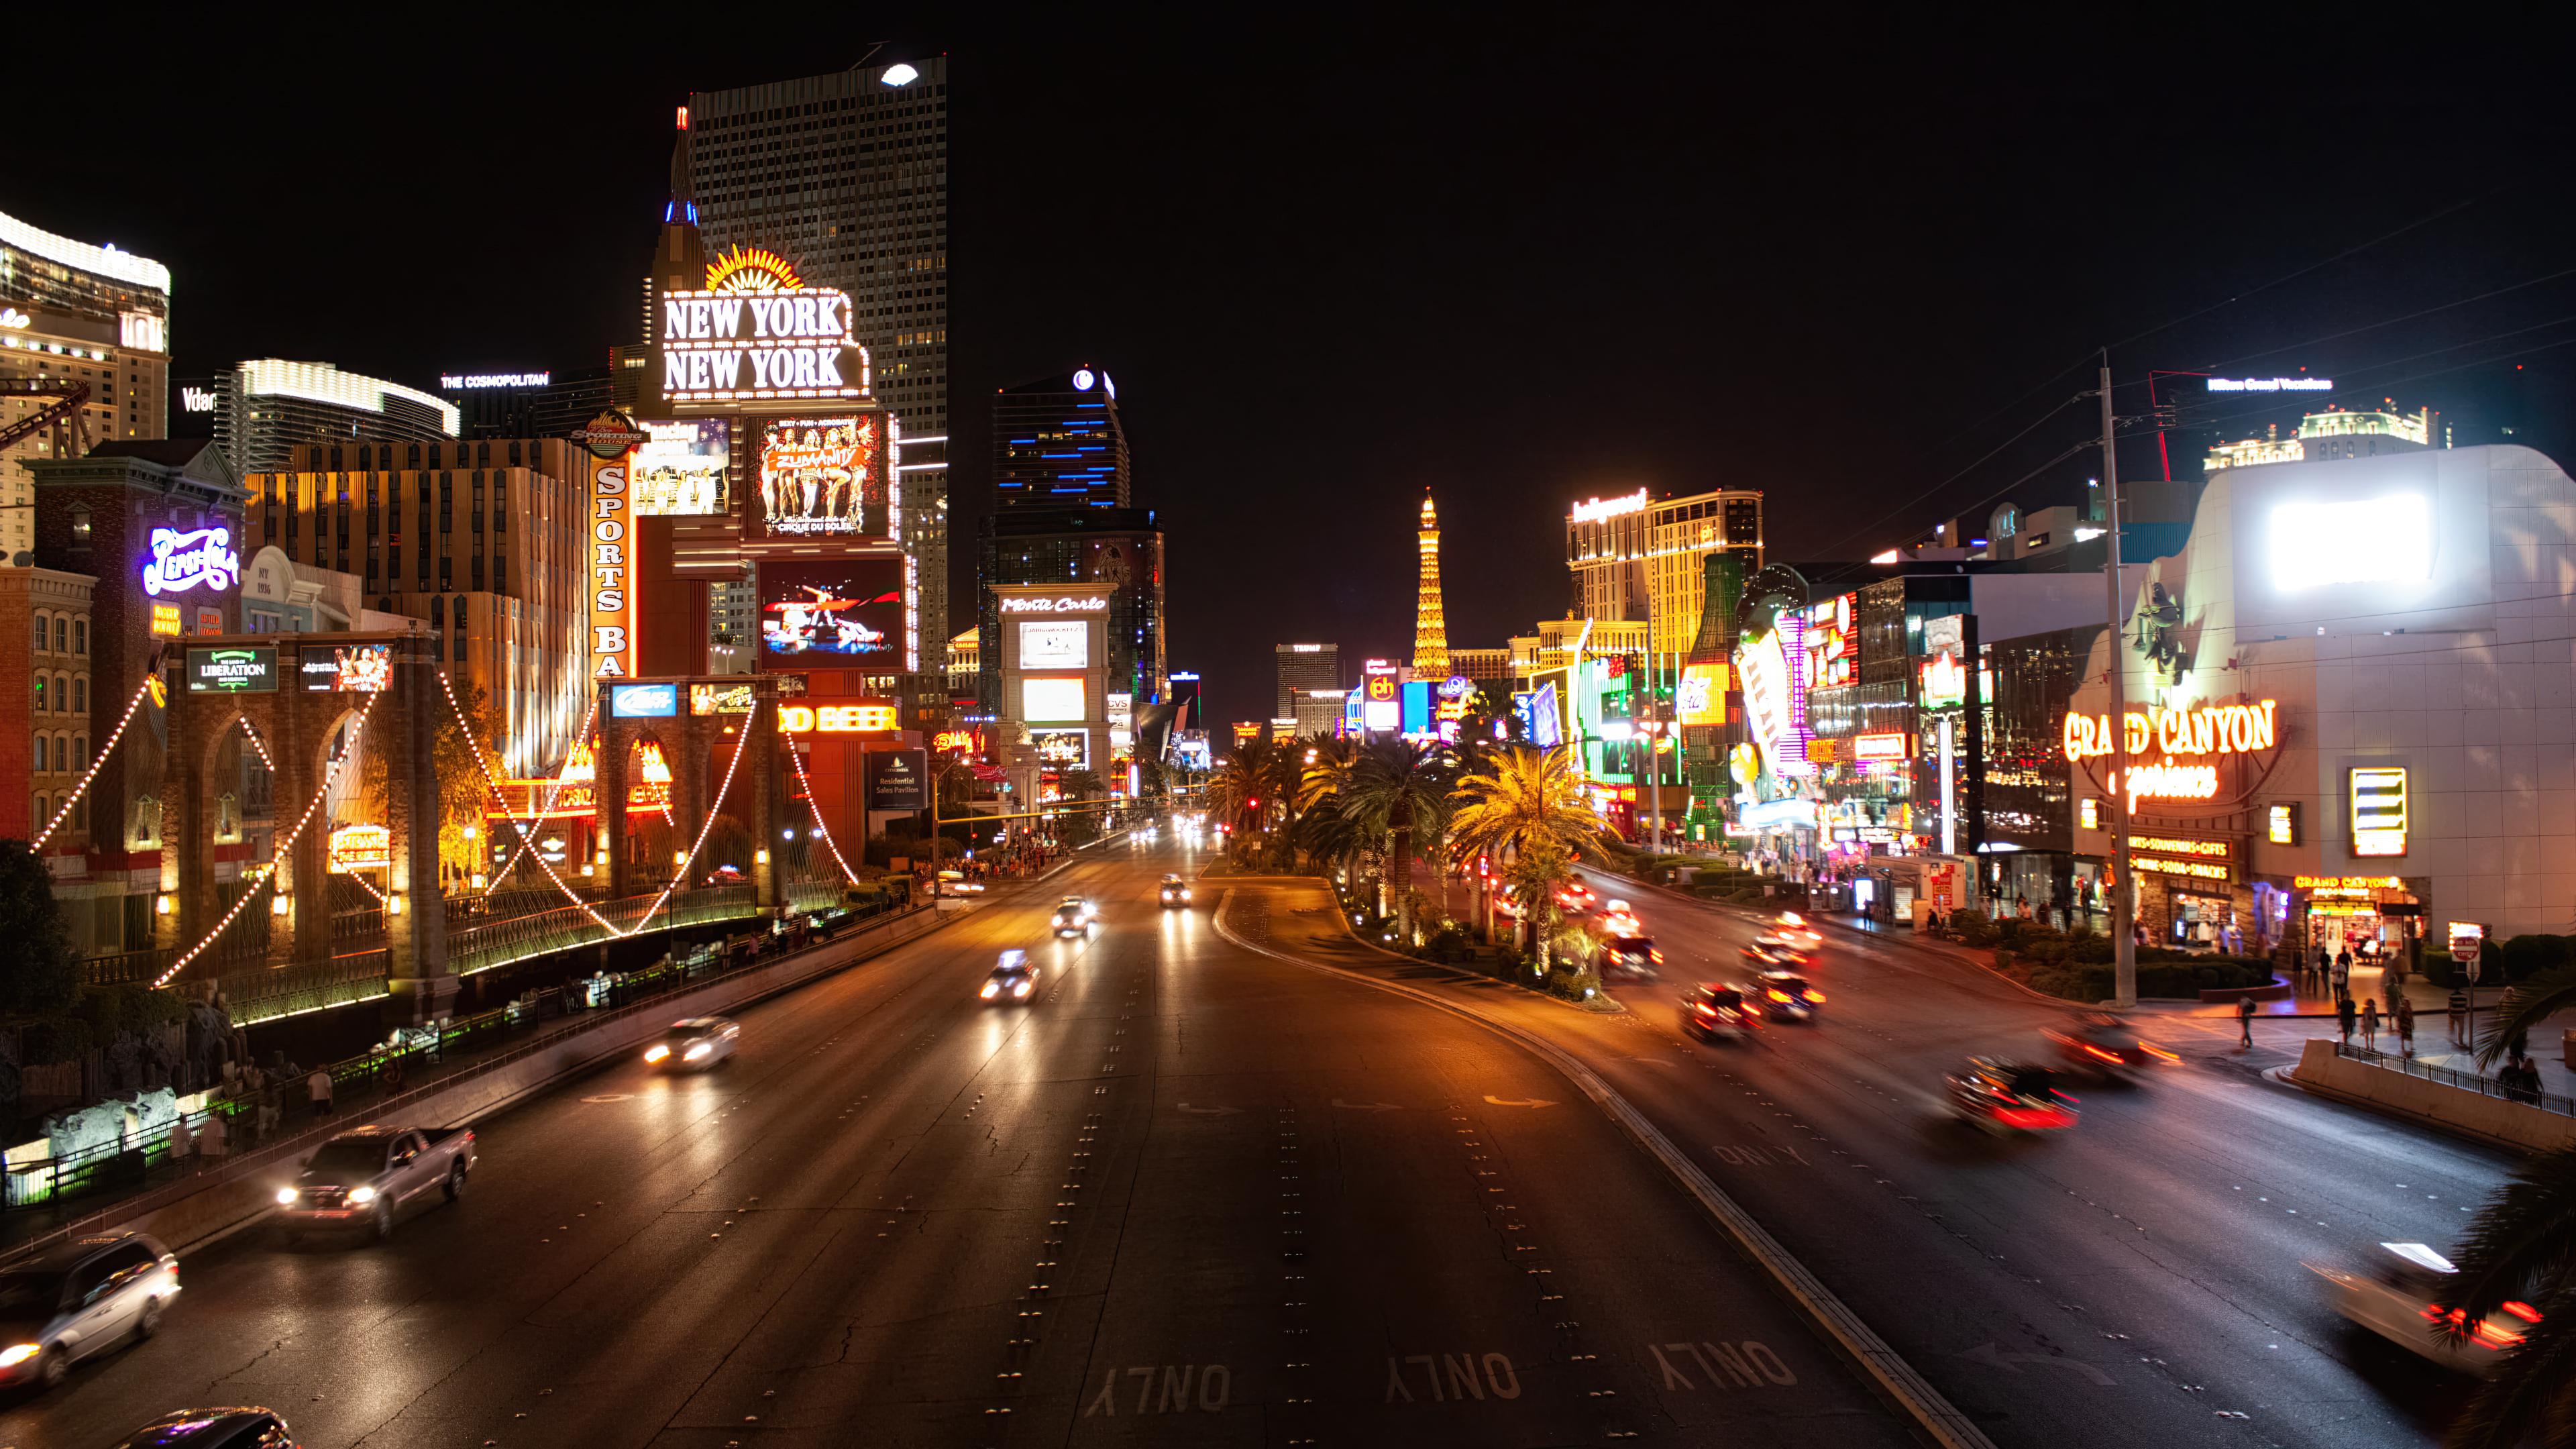 Vegas 4K wallpaper for your desktop or mobile screen free and easy to download